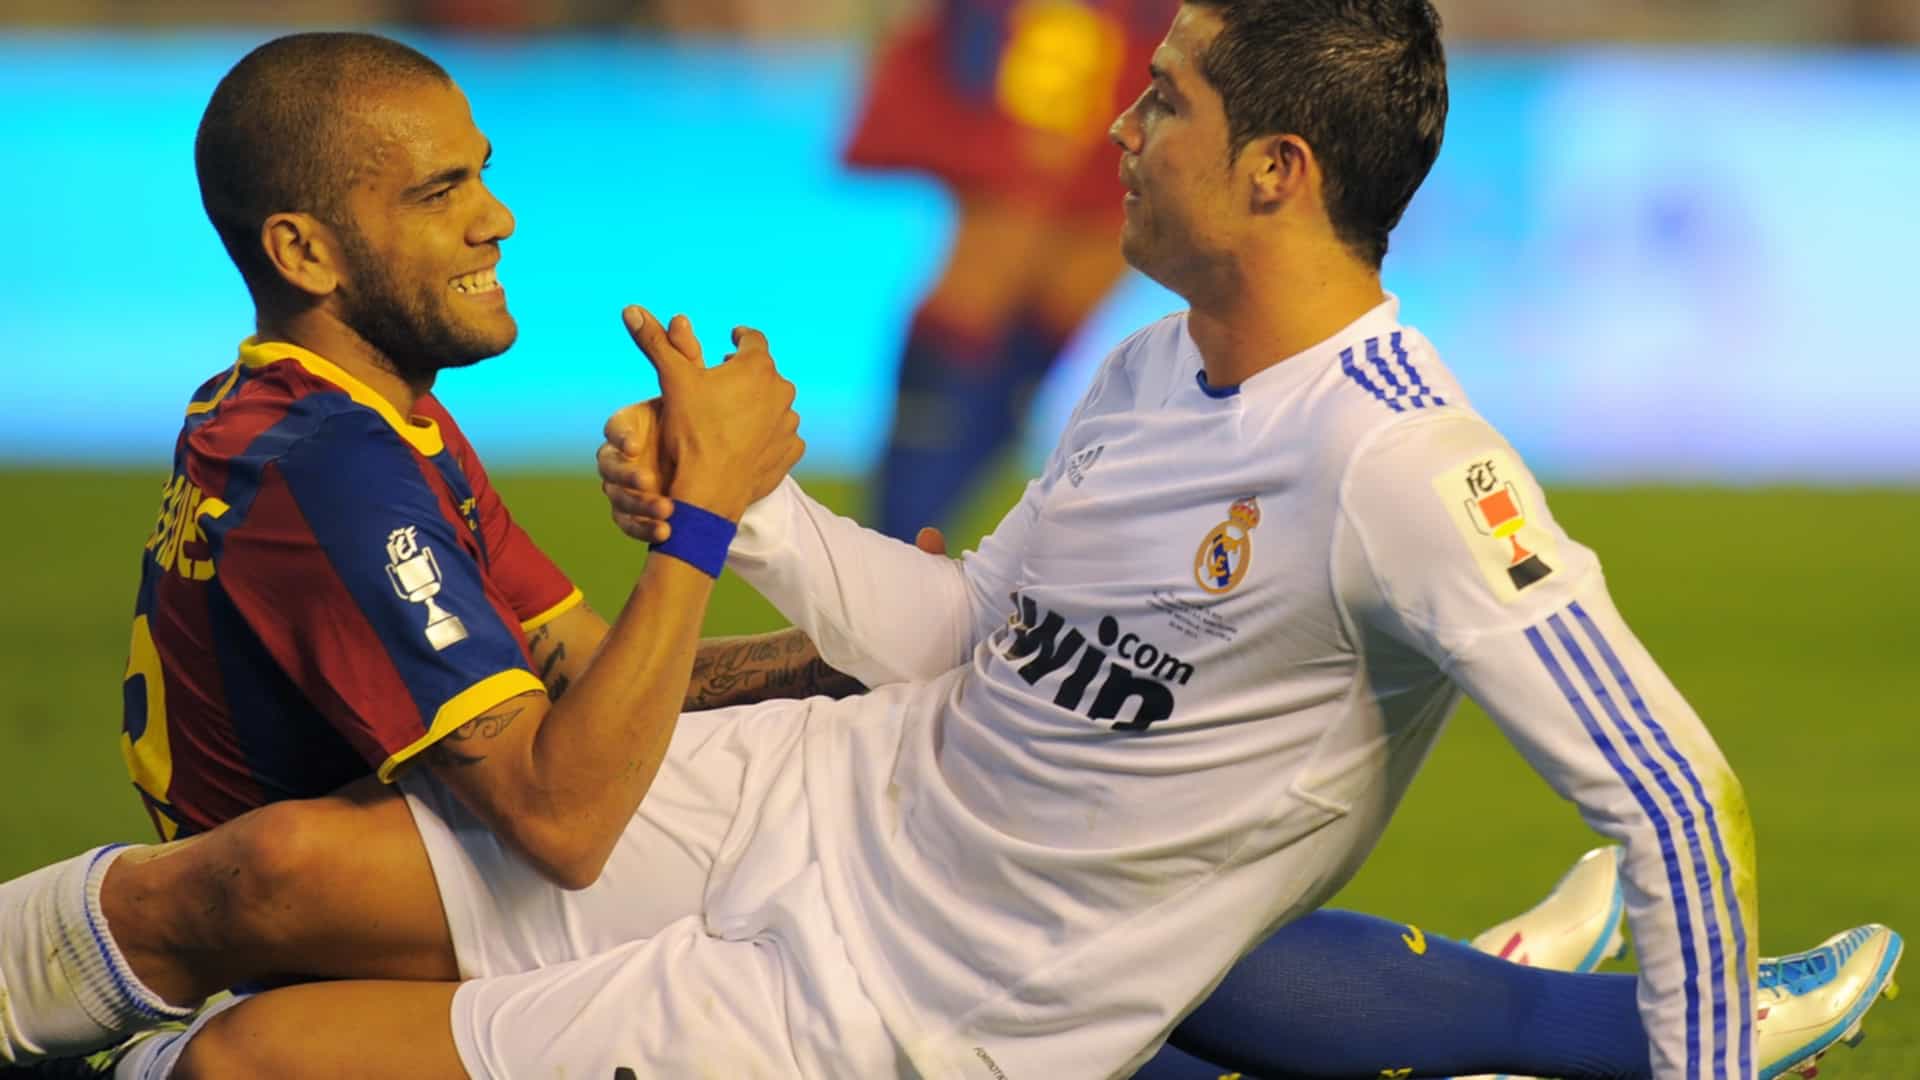 Dani Alves reveals secret admiration for Cristiano Ronaldo after years of ‘El Clasico’ rivalry admitting he identifies more with the Manchester United star than former teammate Lionel Messi